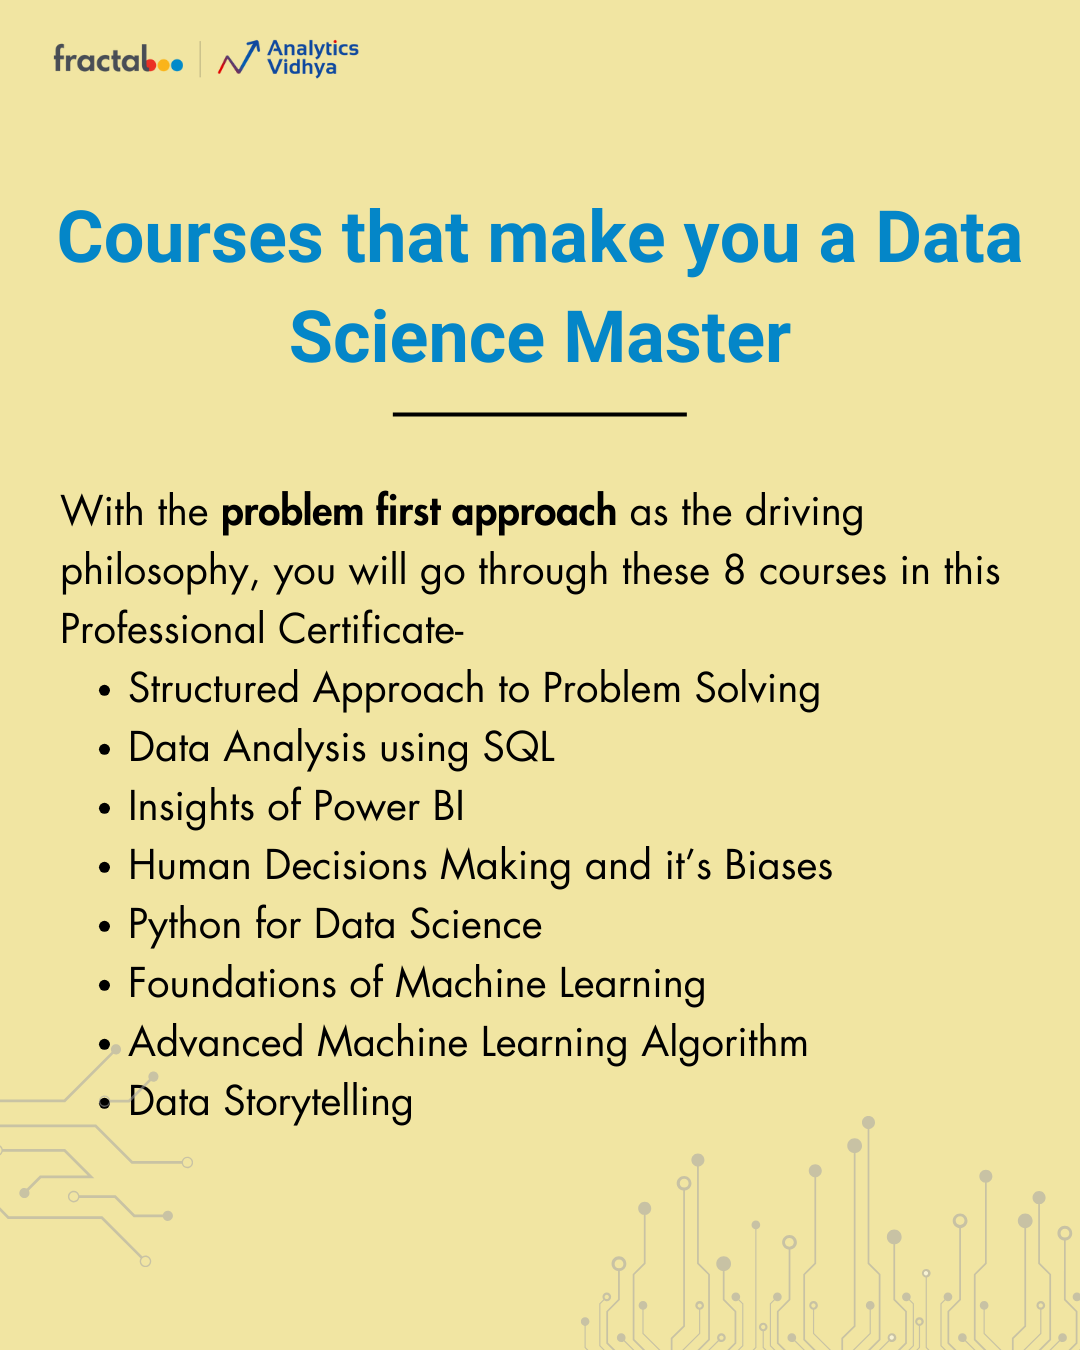 Fractal Data Science Professional Certificate